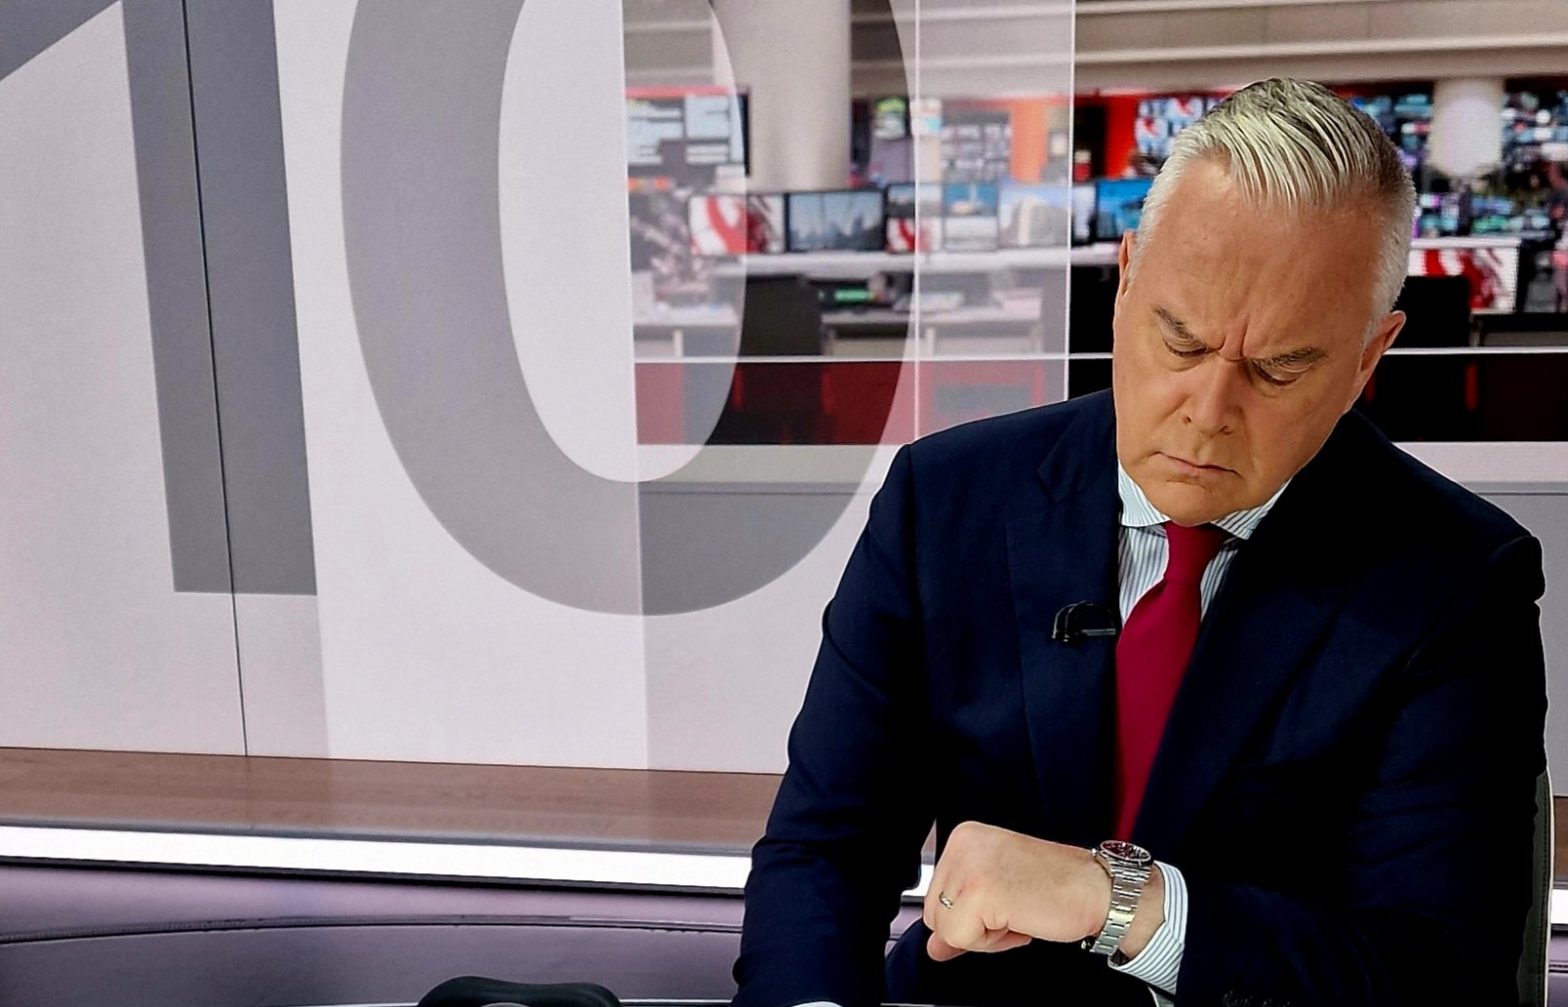 Kelvin MacKenzie questions presenter Huw Edwards’ £25K salary rise after BBC discloses annual salaries